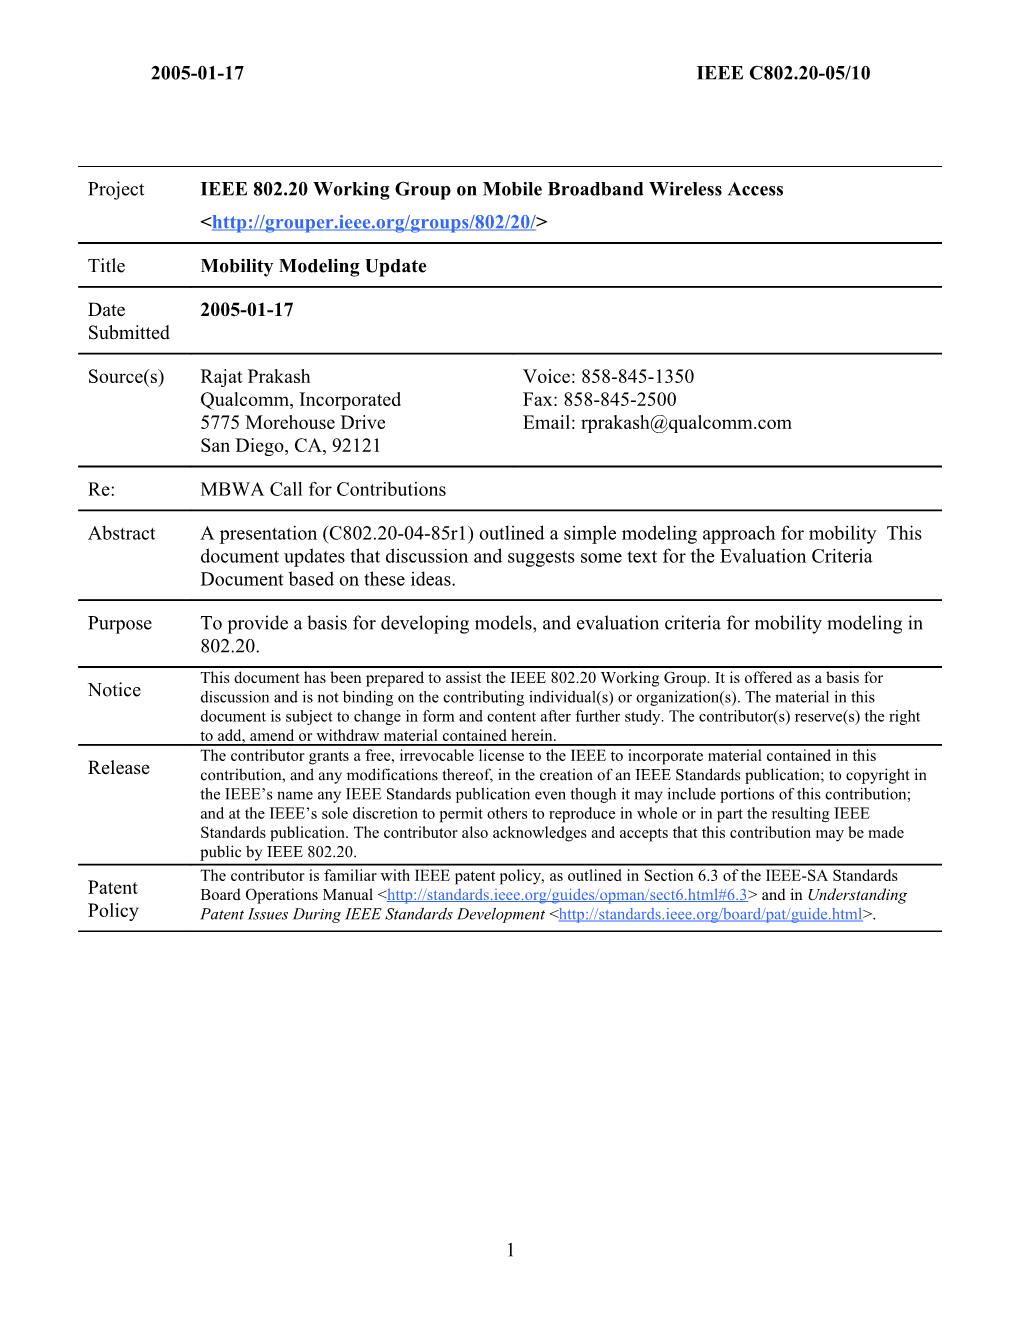 Proposed Text for Section 5.5: Modeling Mobility for Signaling Robustness Evaluation